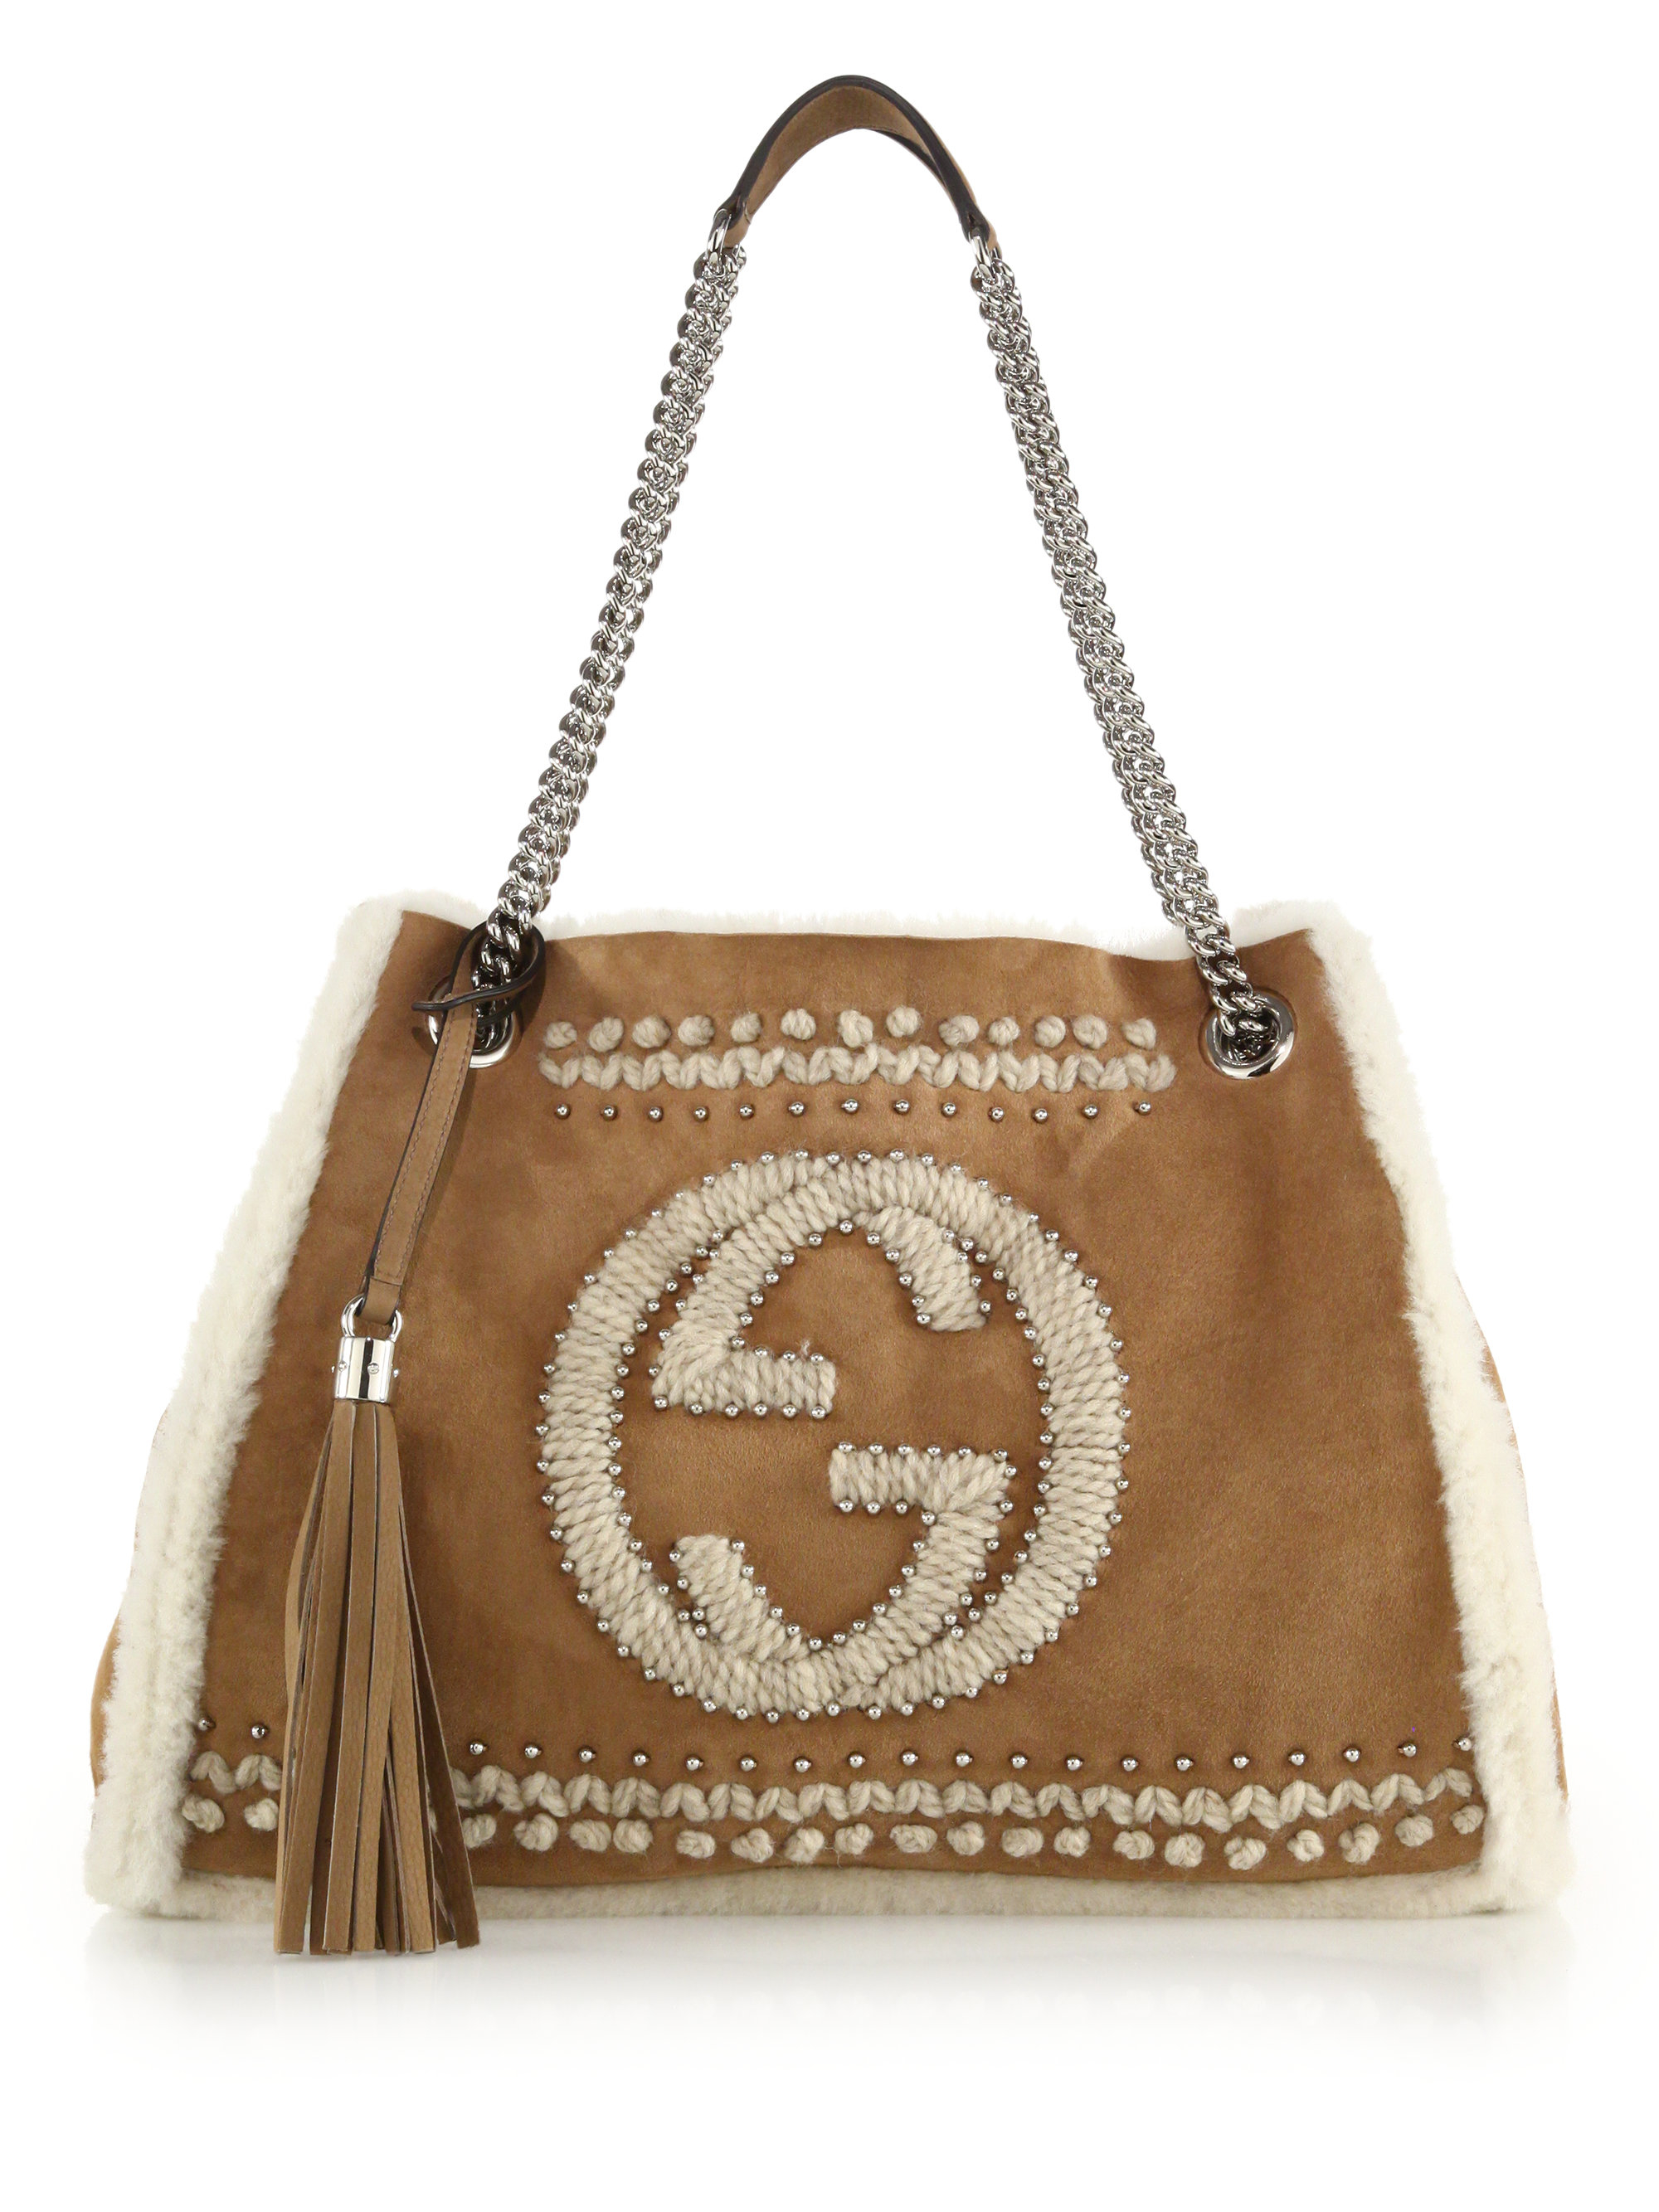 Gucci Soho Chain Shearling Shoulder Bag in Brown - Lyst